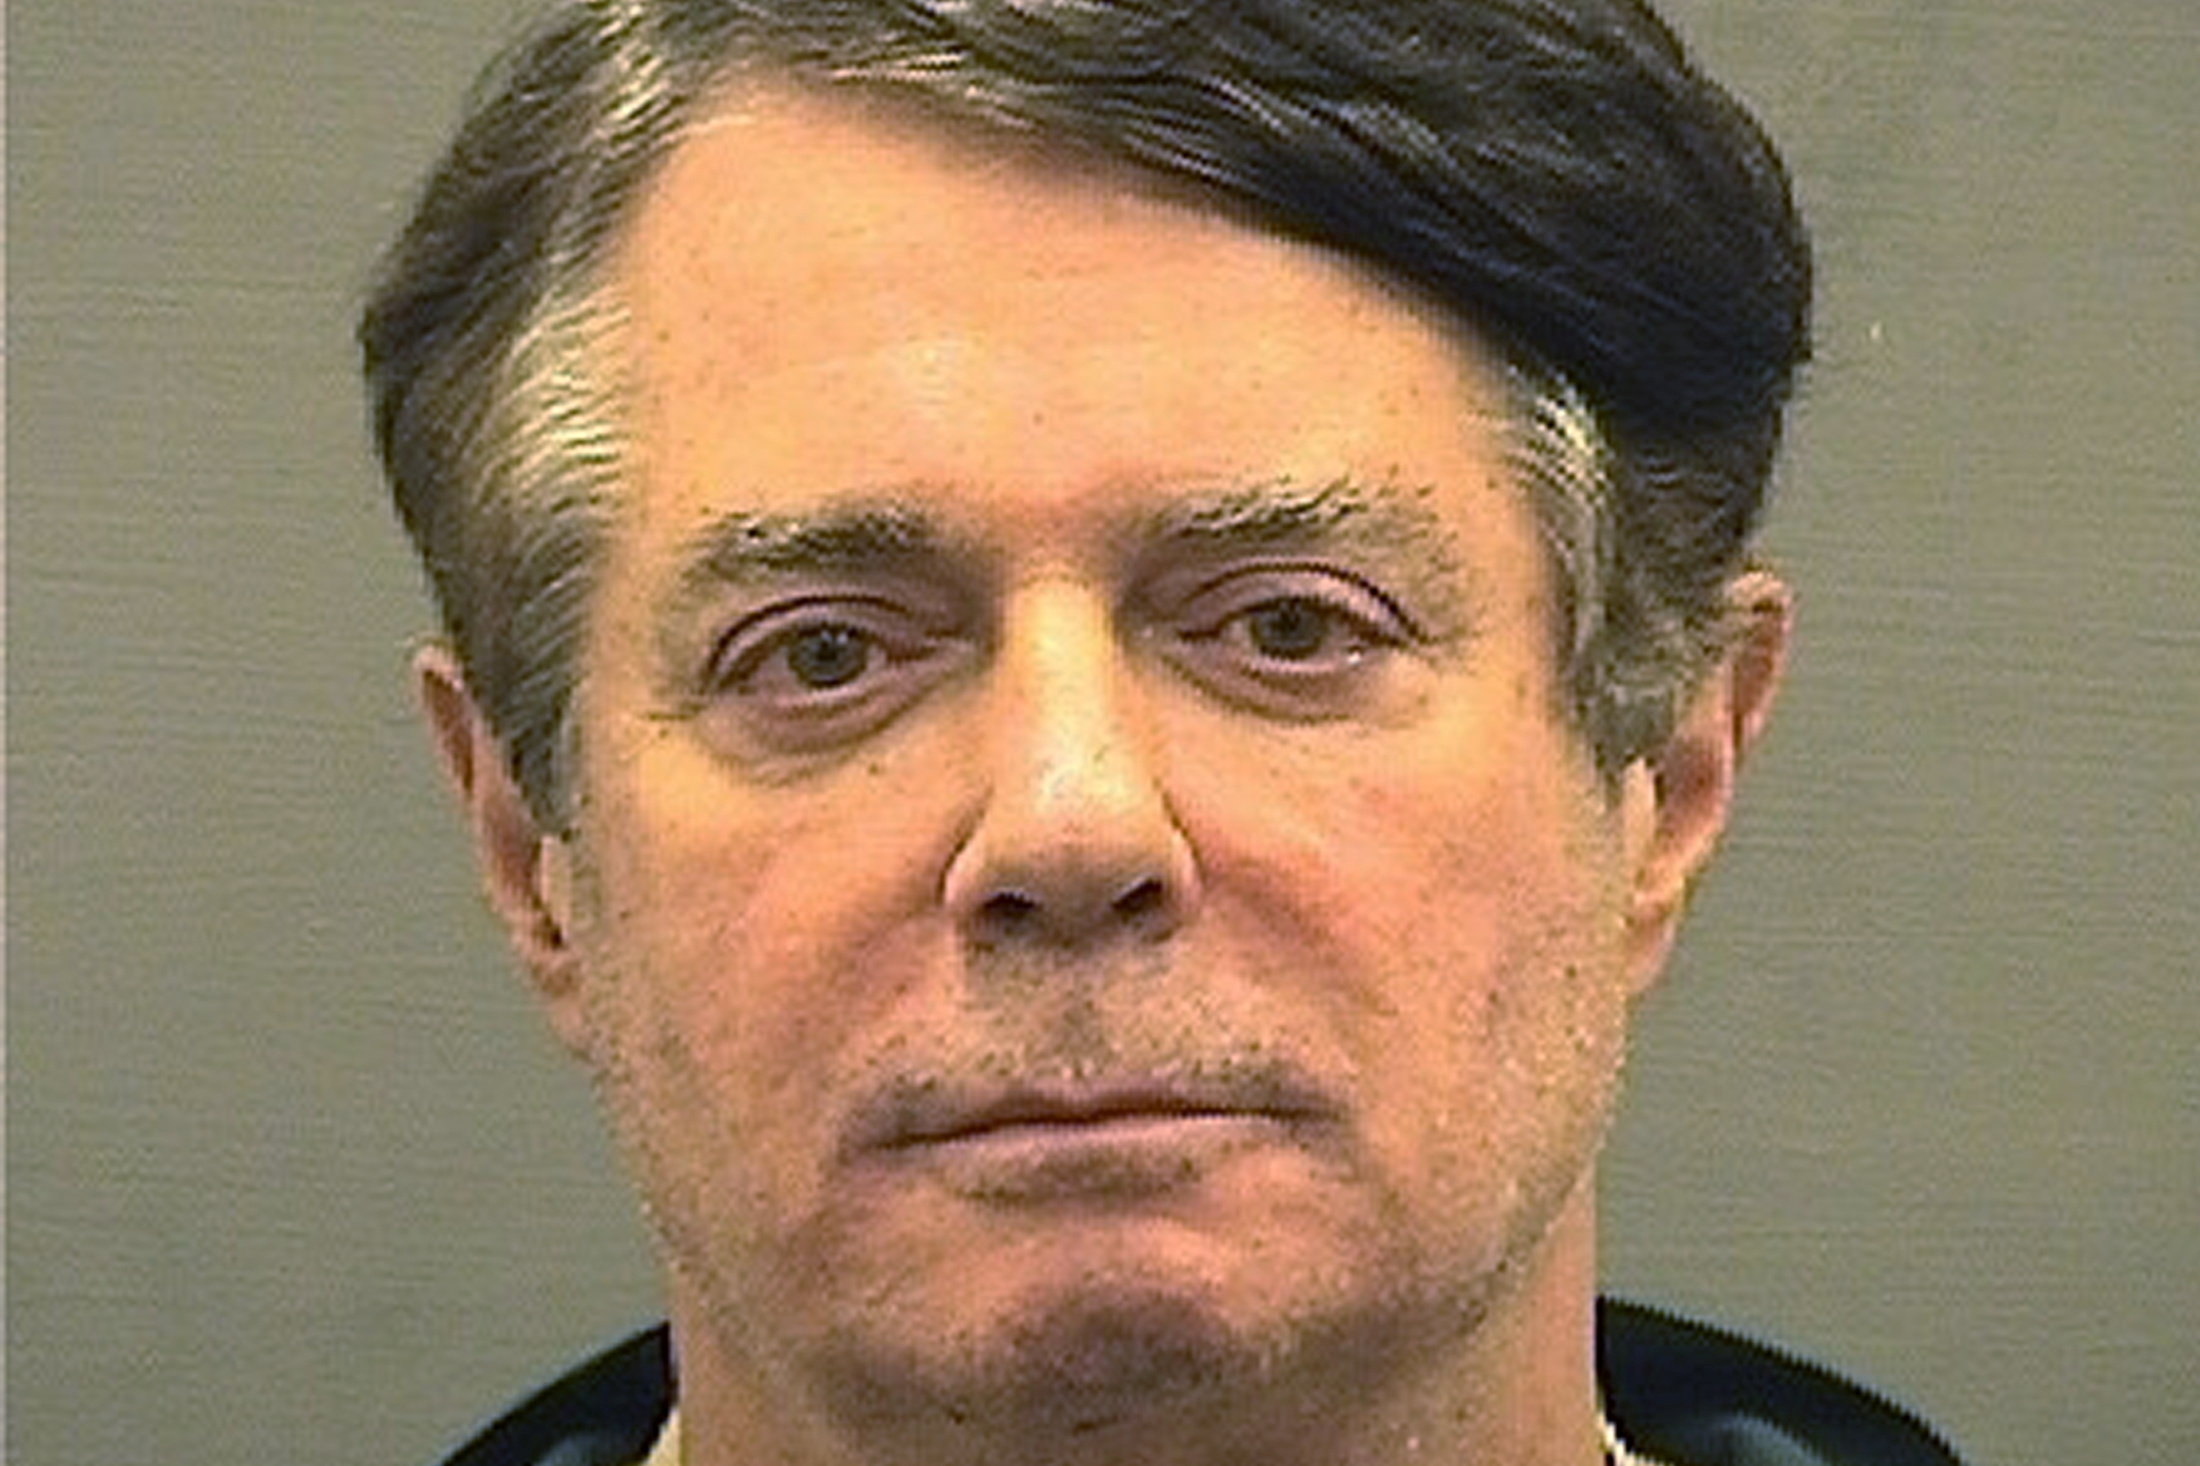 Paul Manafort is shown in this booking photo in Alexanderia, Virginia. Alexandria Sheriff's Office/Handout via REUTERS